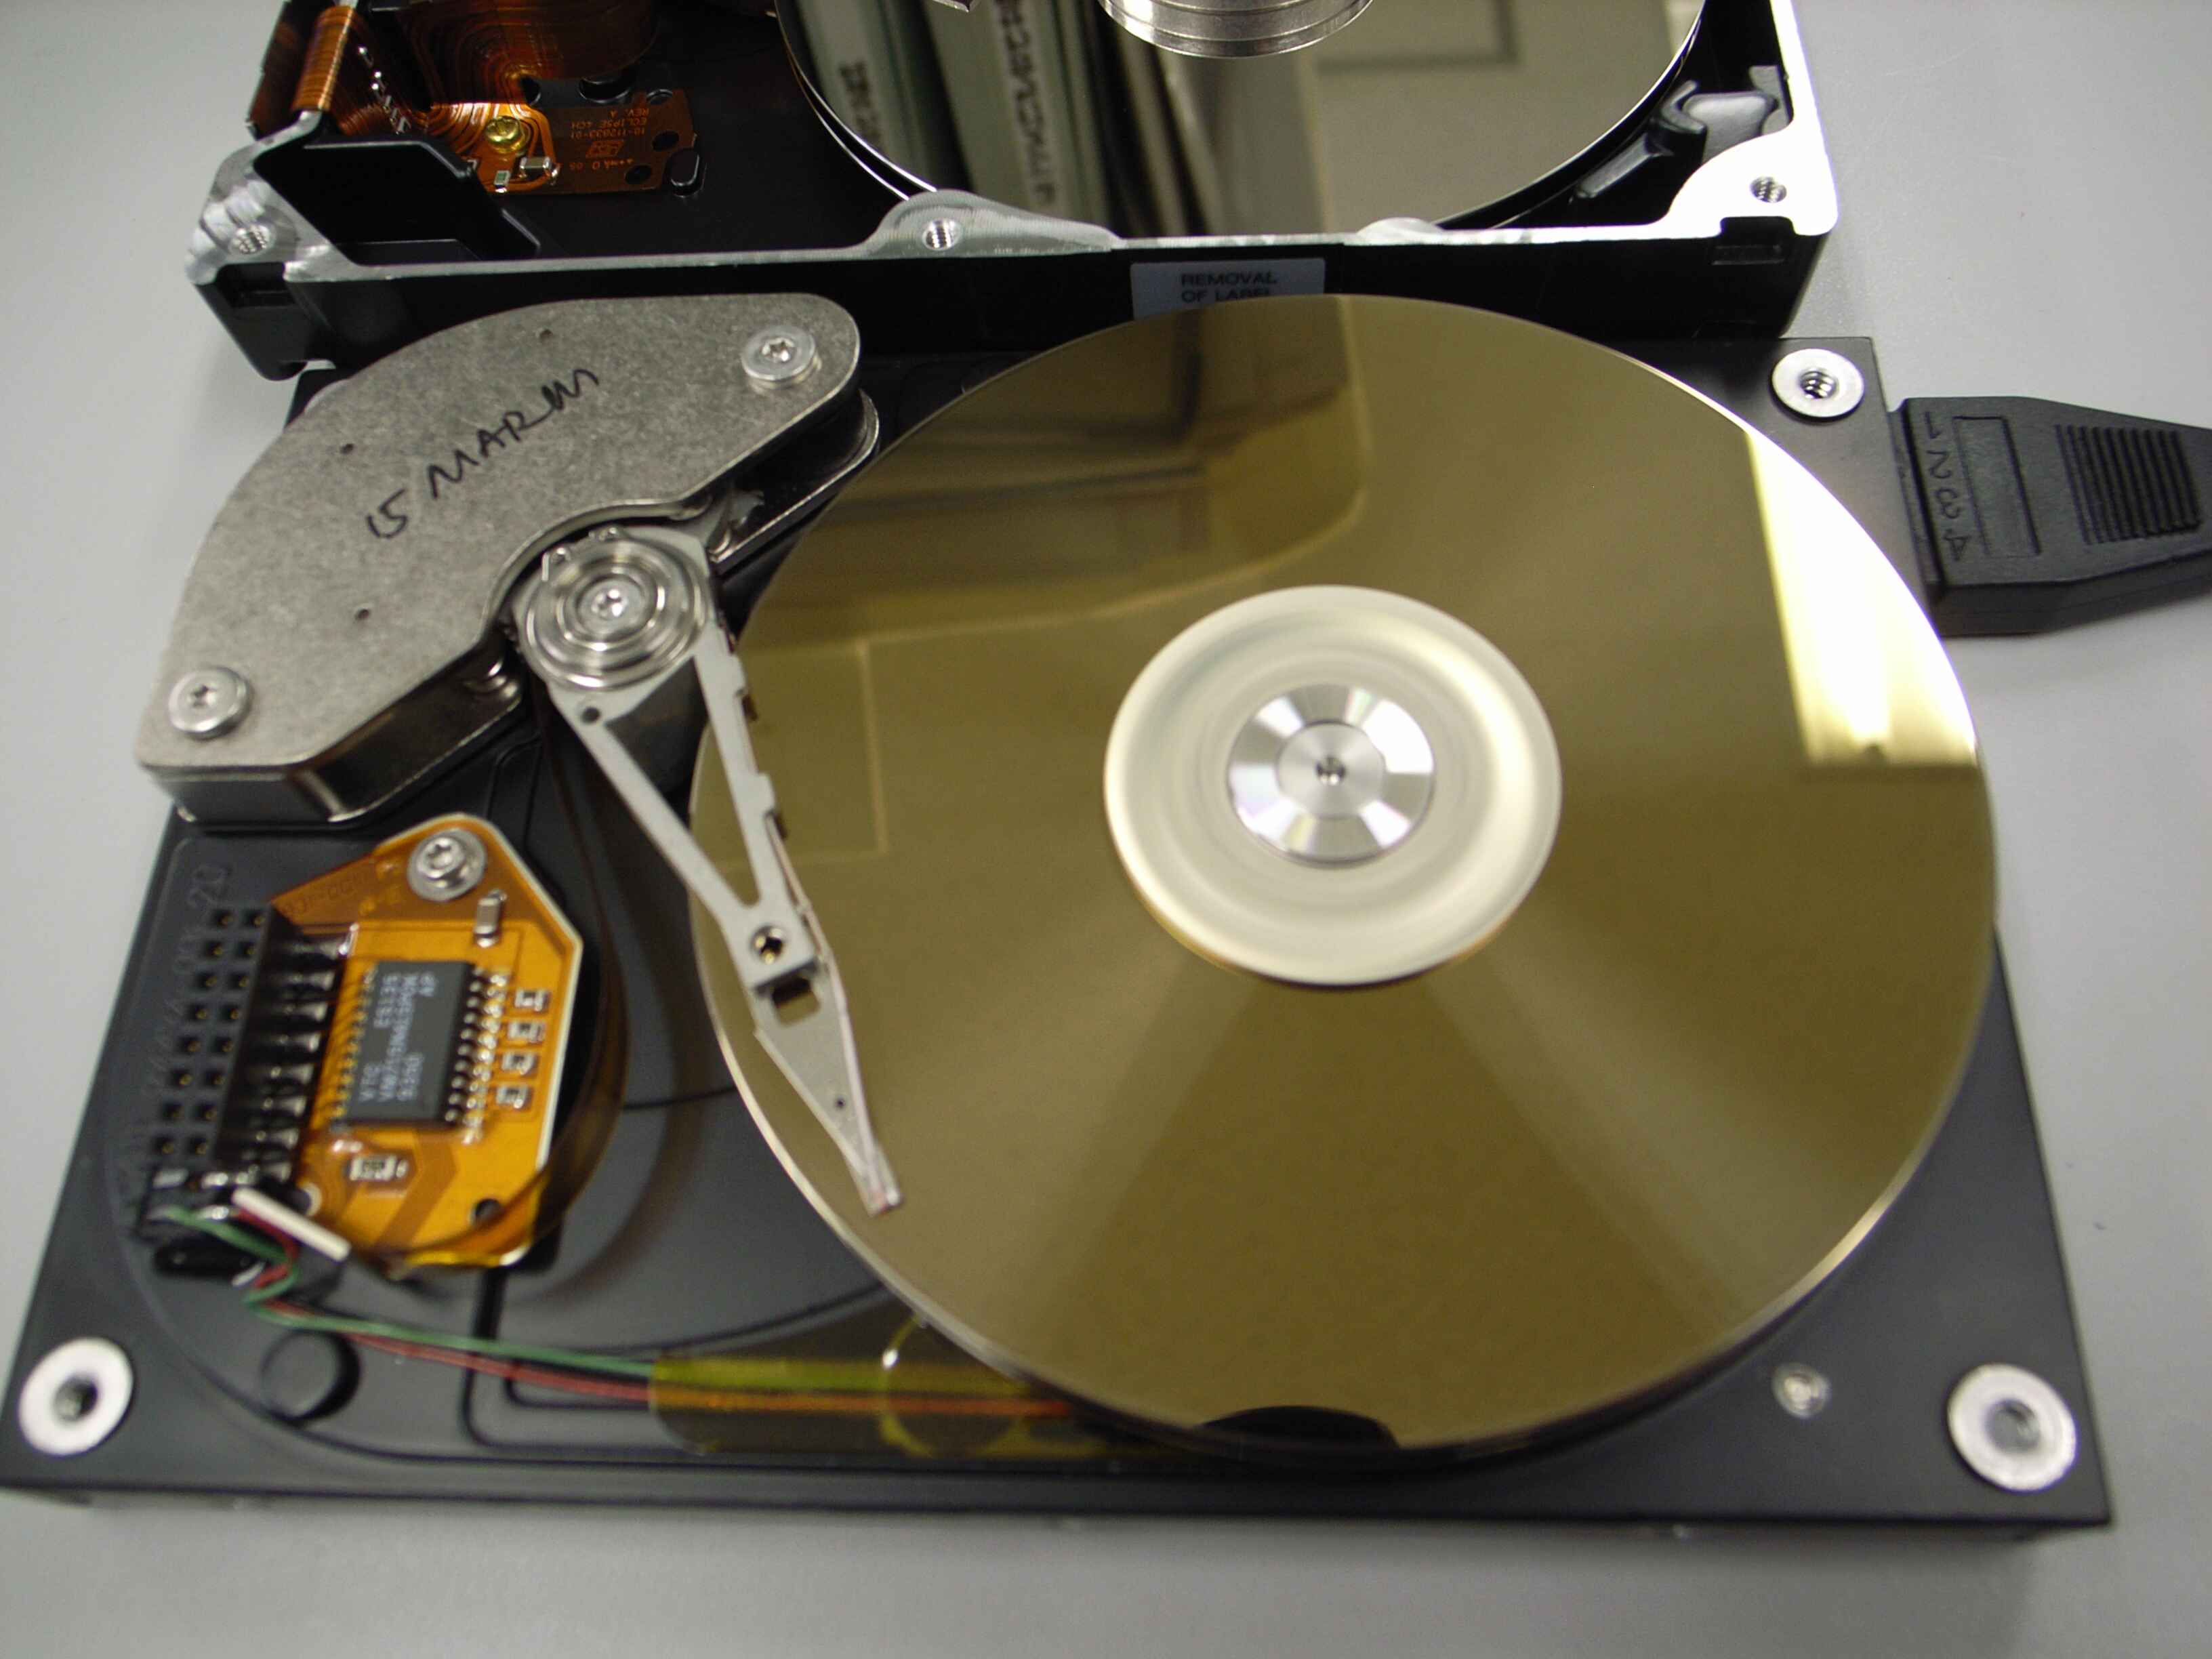 What Are The Platters Of The Hard Disk Drive Made Of?